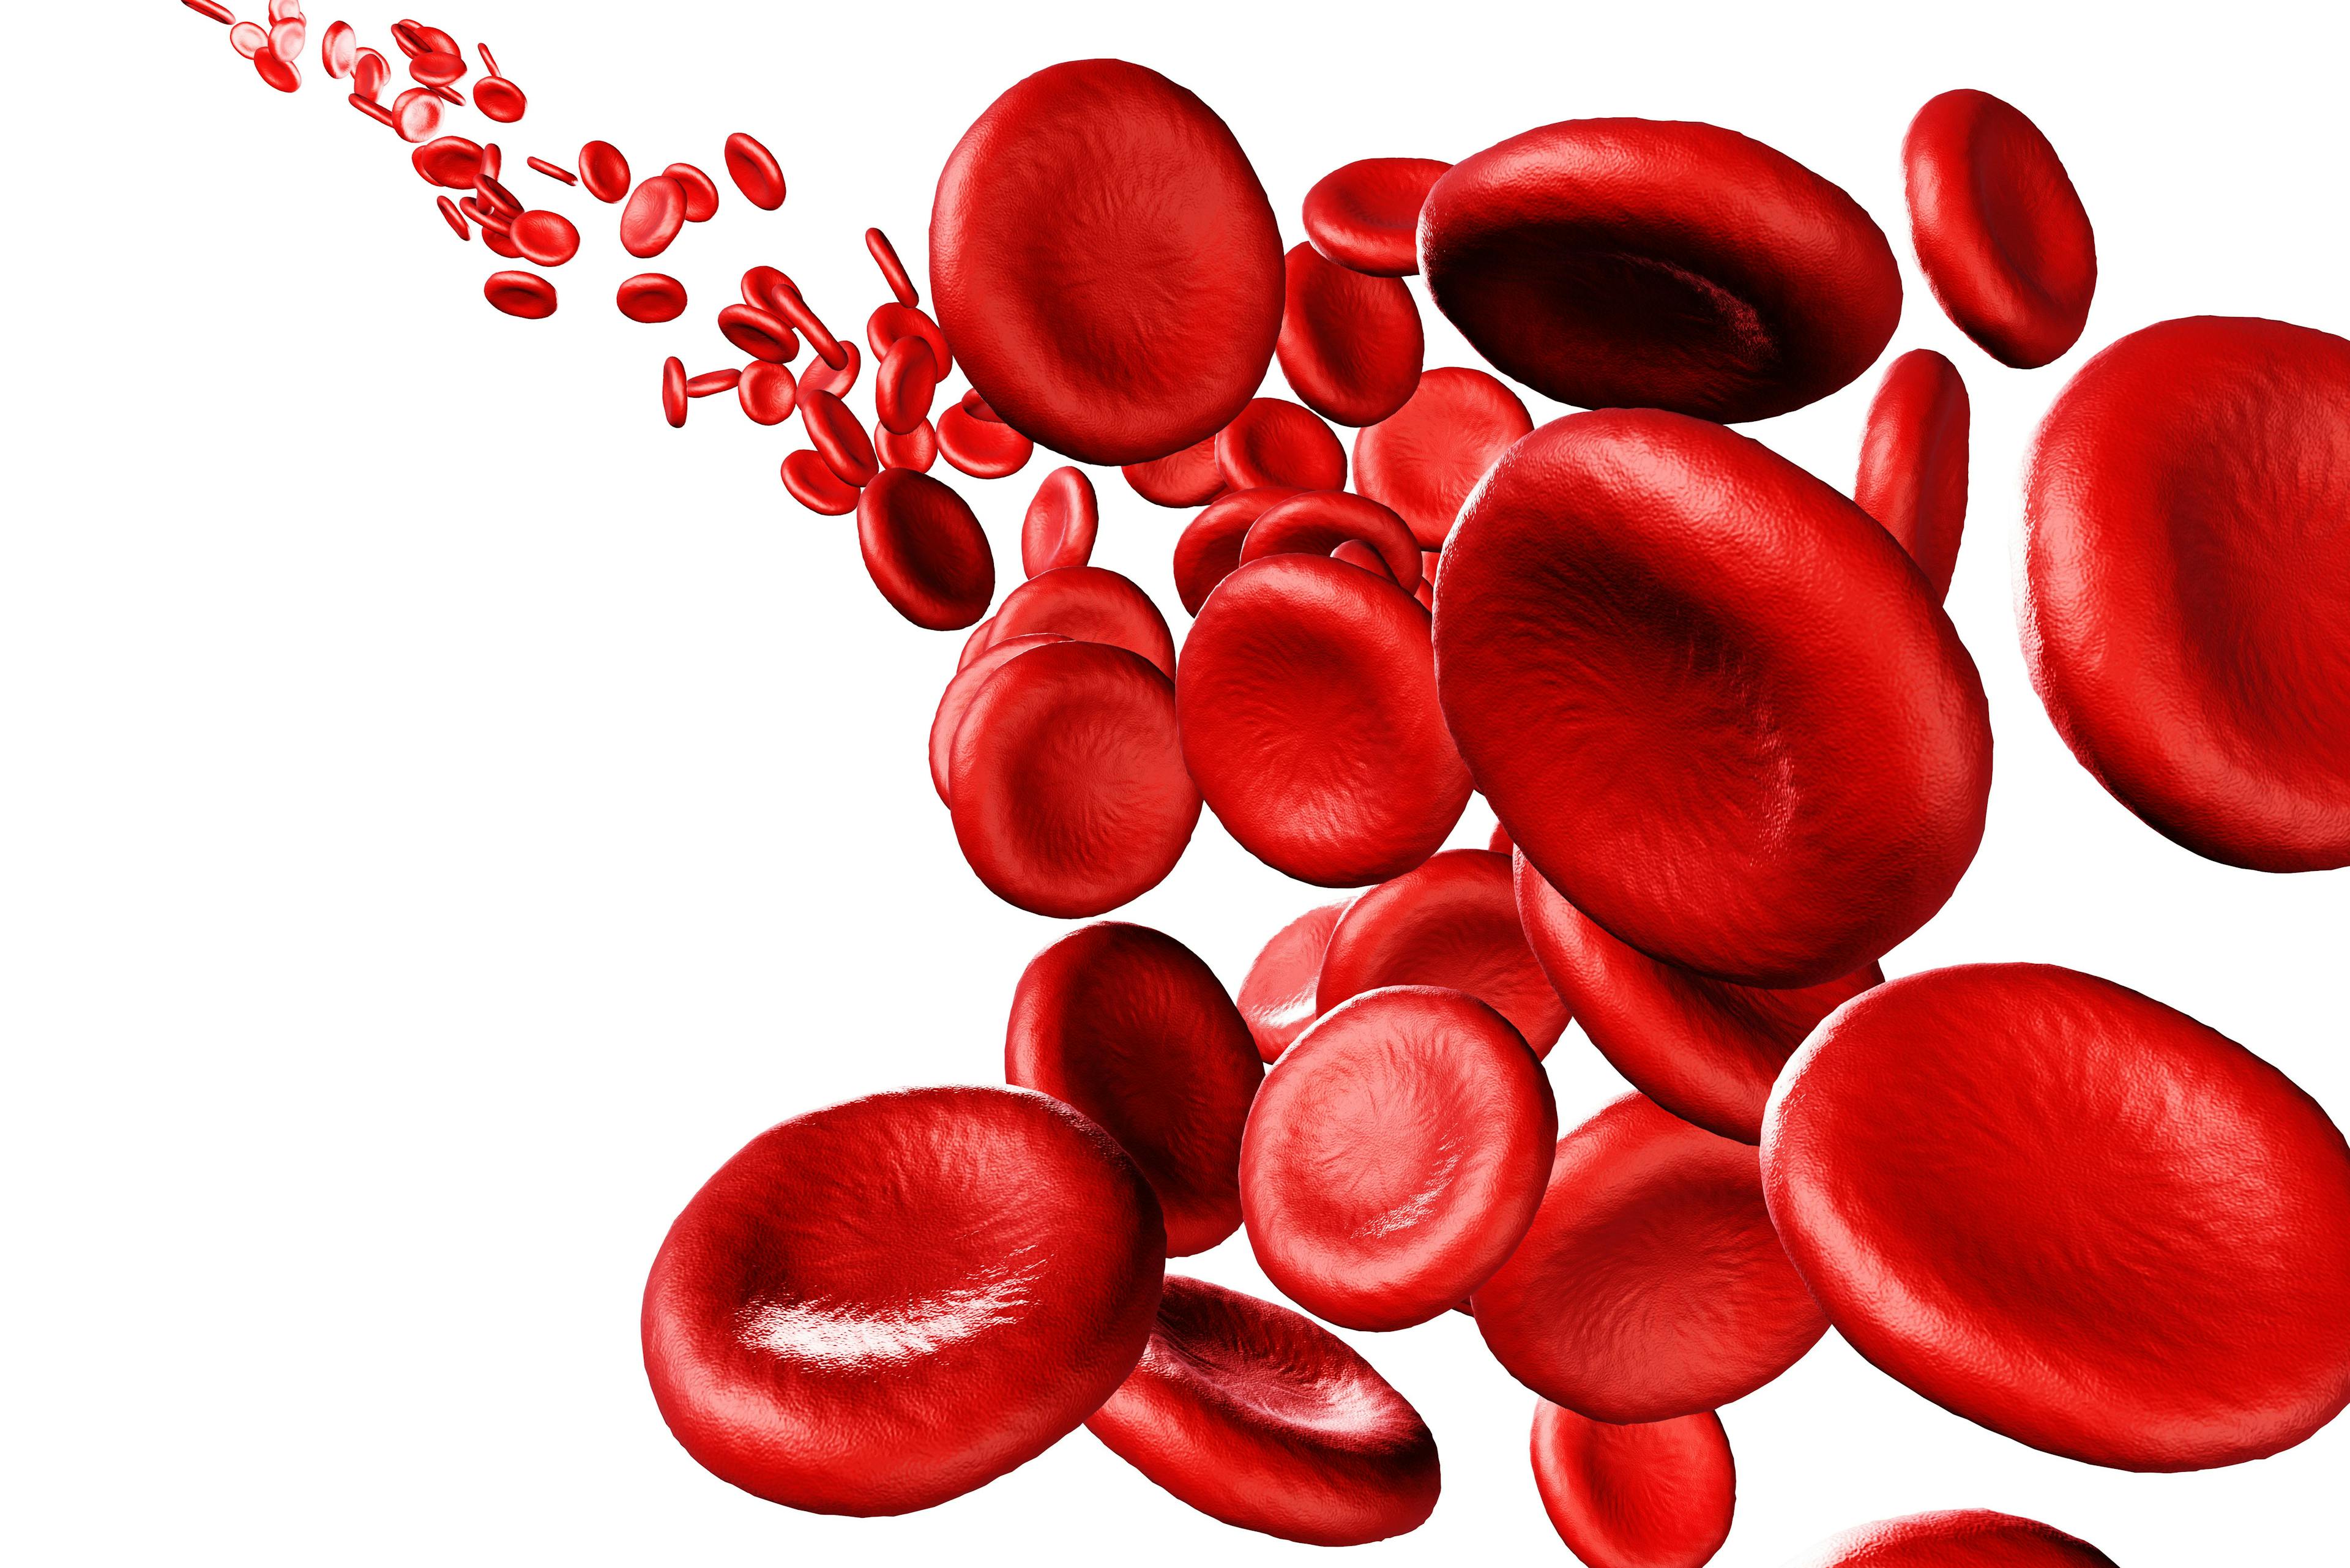 Luspatercept for Anemia Related to Low-Risk Myelodysplastic Syndrome